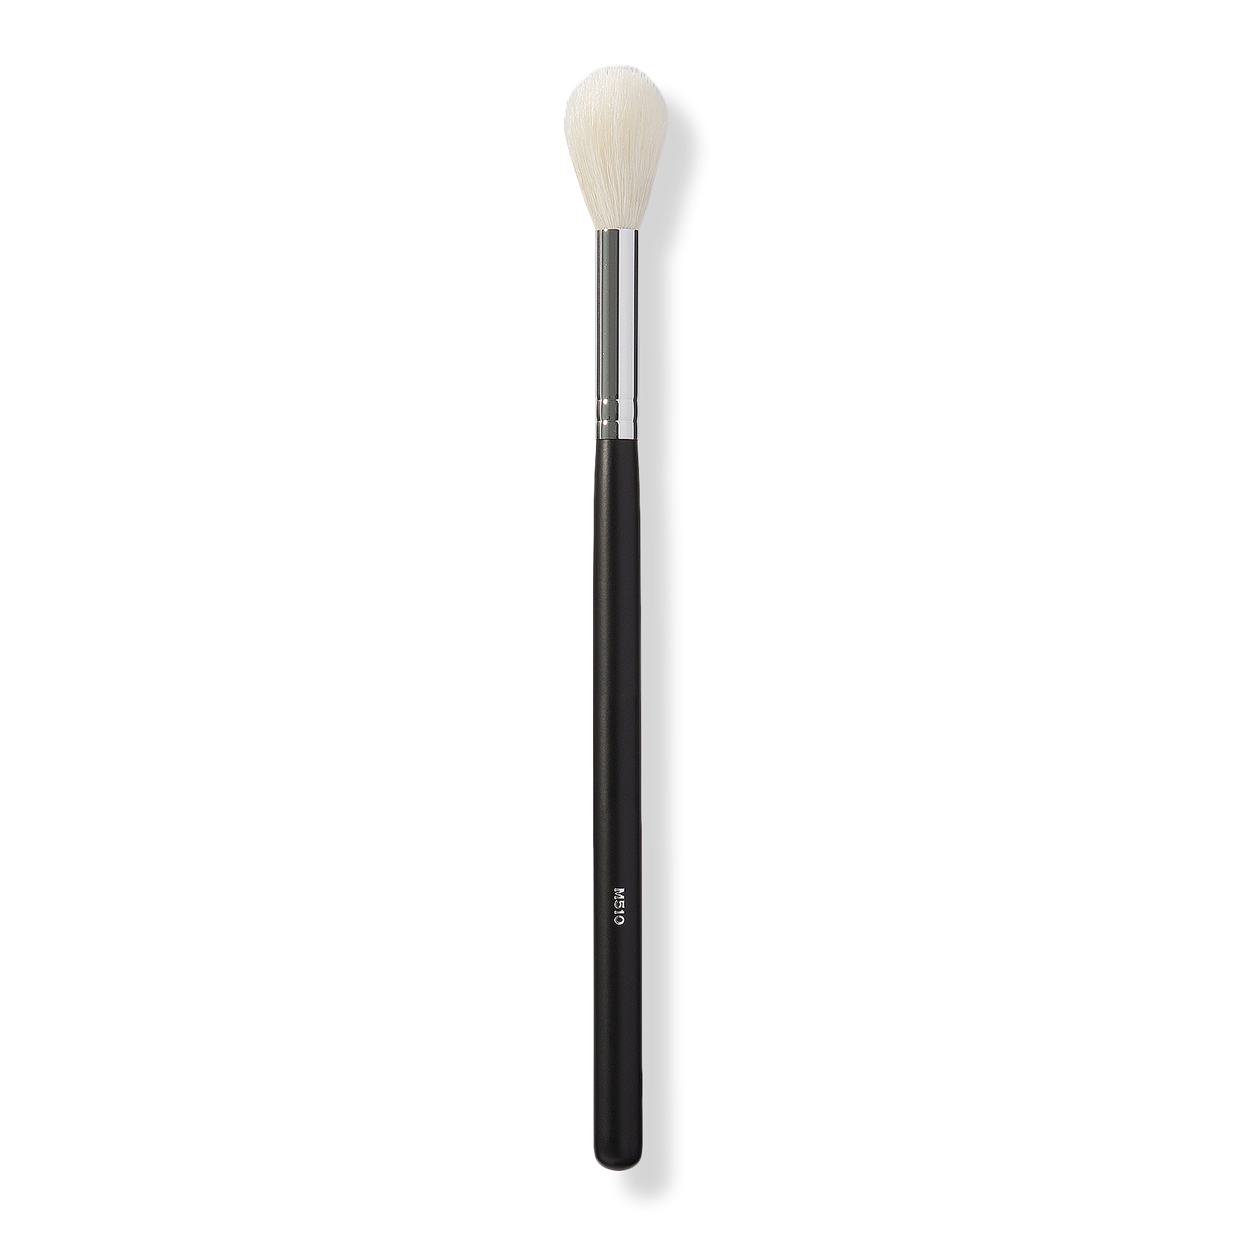 Professional Coloring Brush Kit for Creative Grooming (GT10)